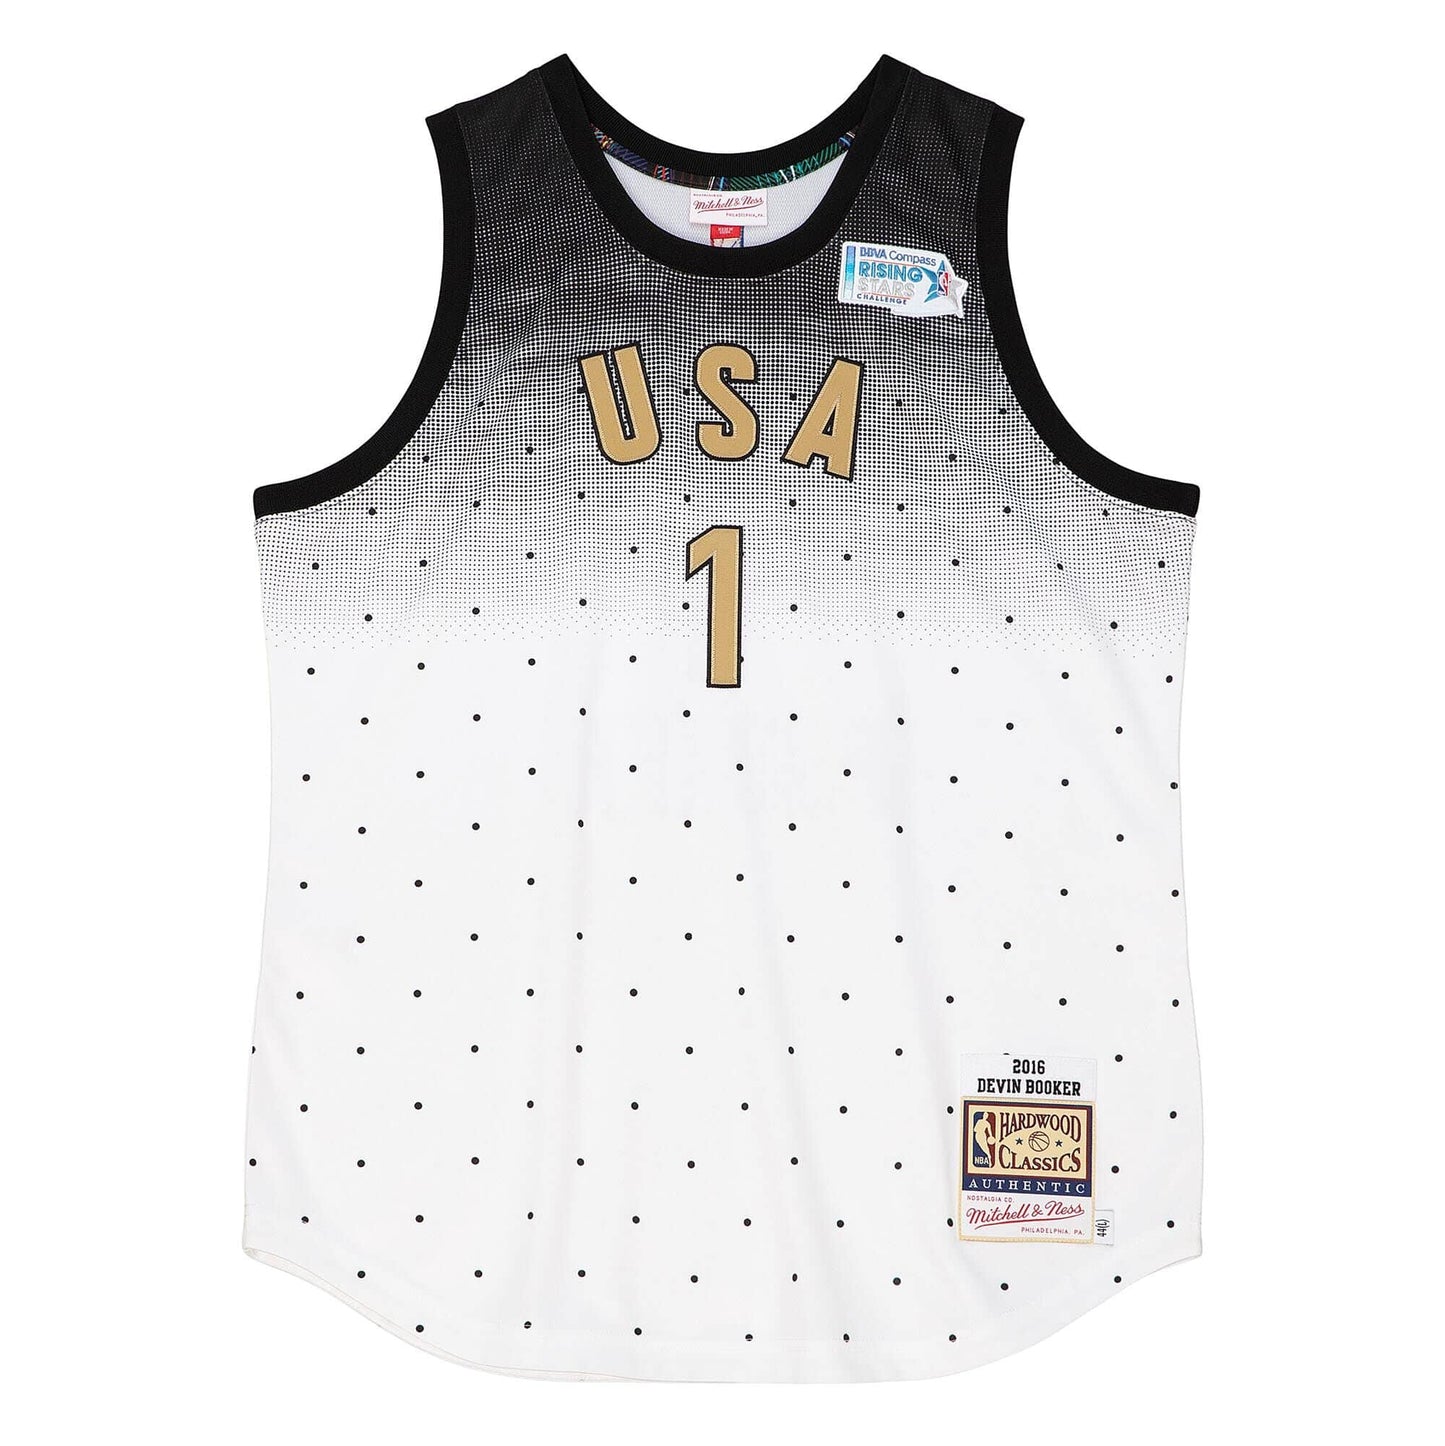 NBA Authentic Jersey All Star USA 2016-17 Devin Booker